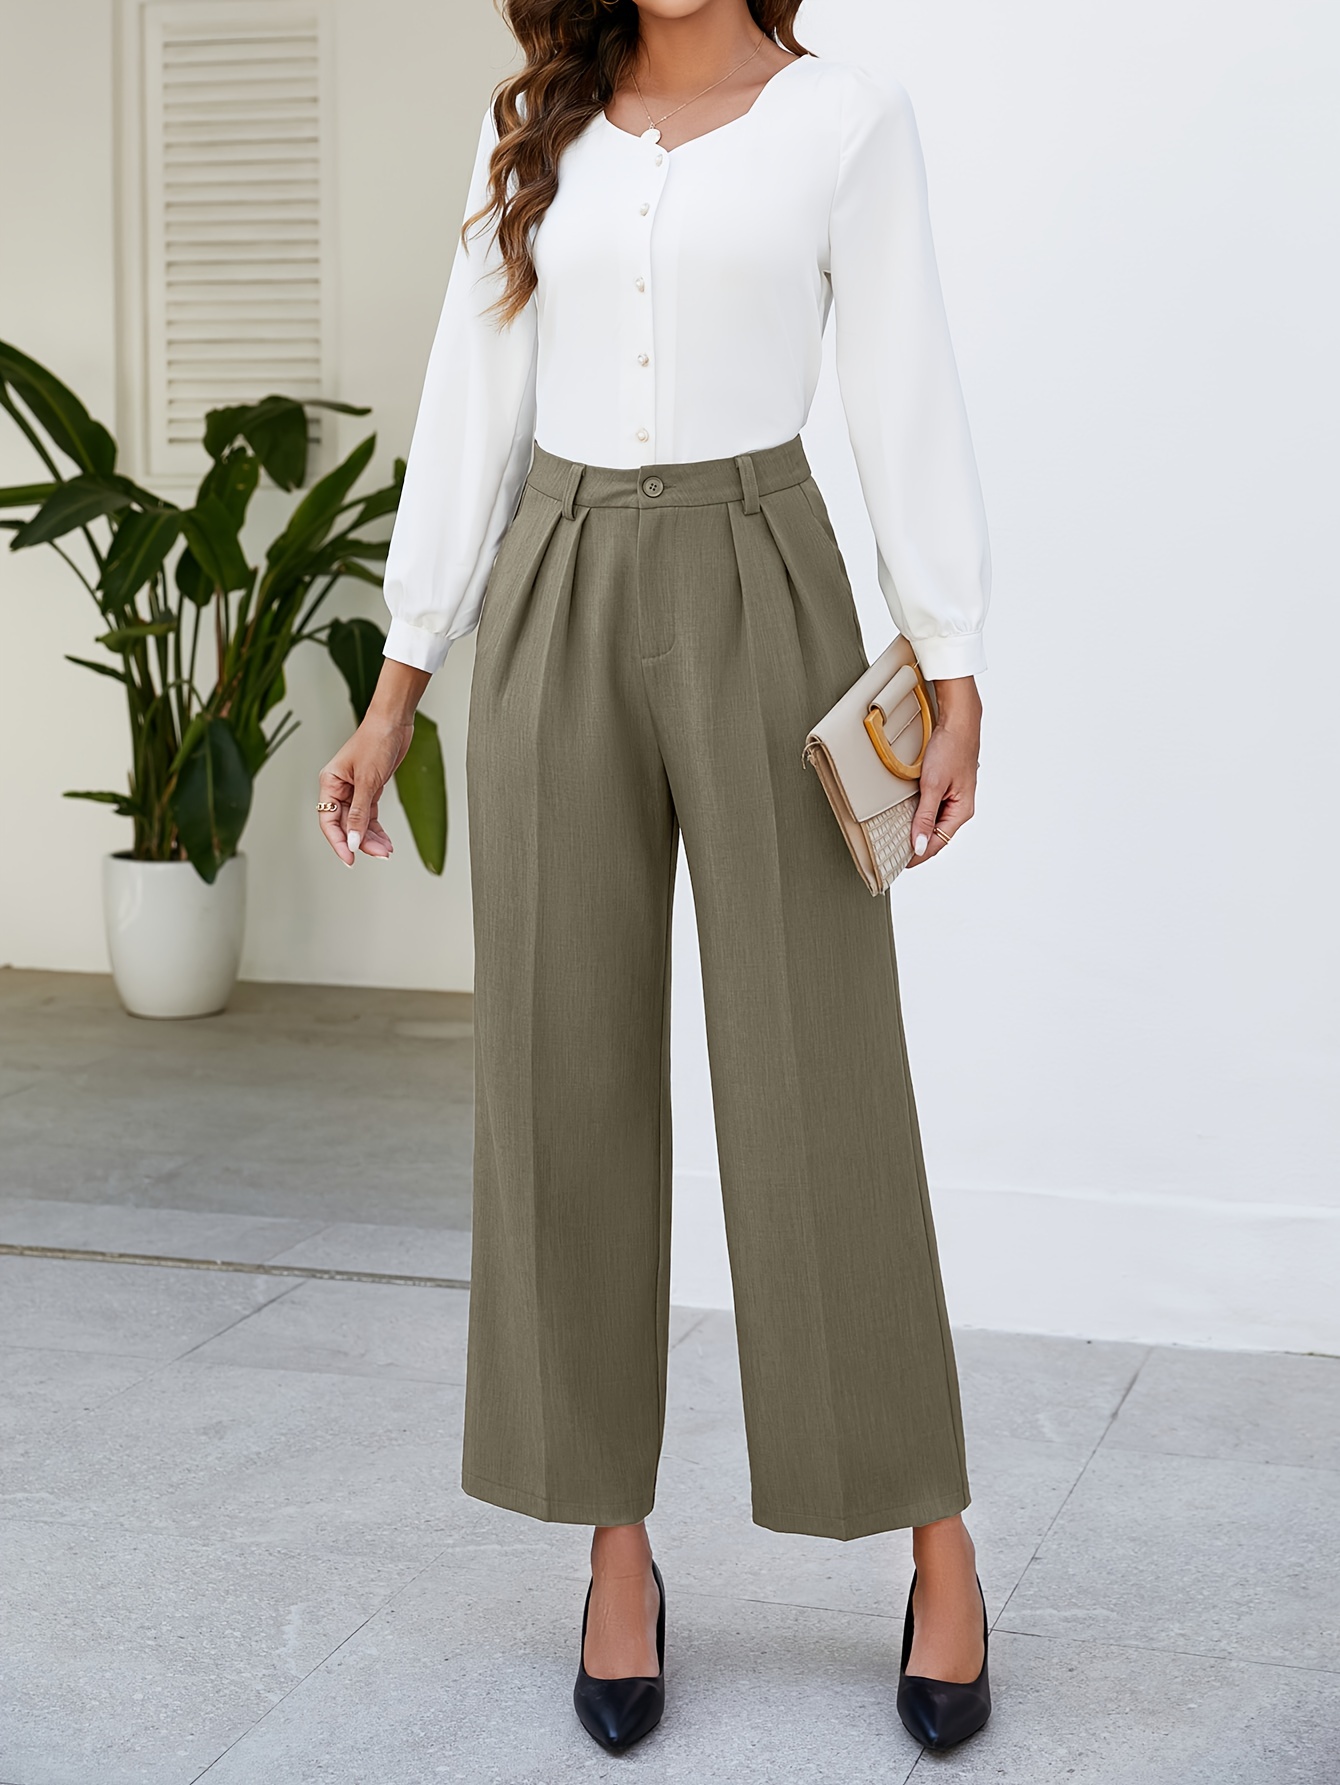  High Waisted Elegant Pleated Pants for Women Slim Fit